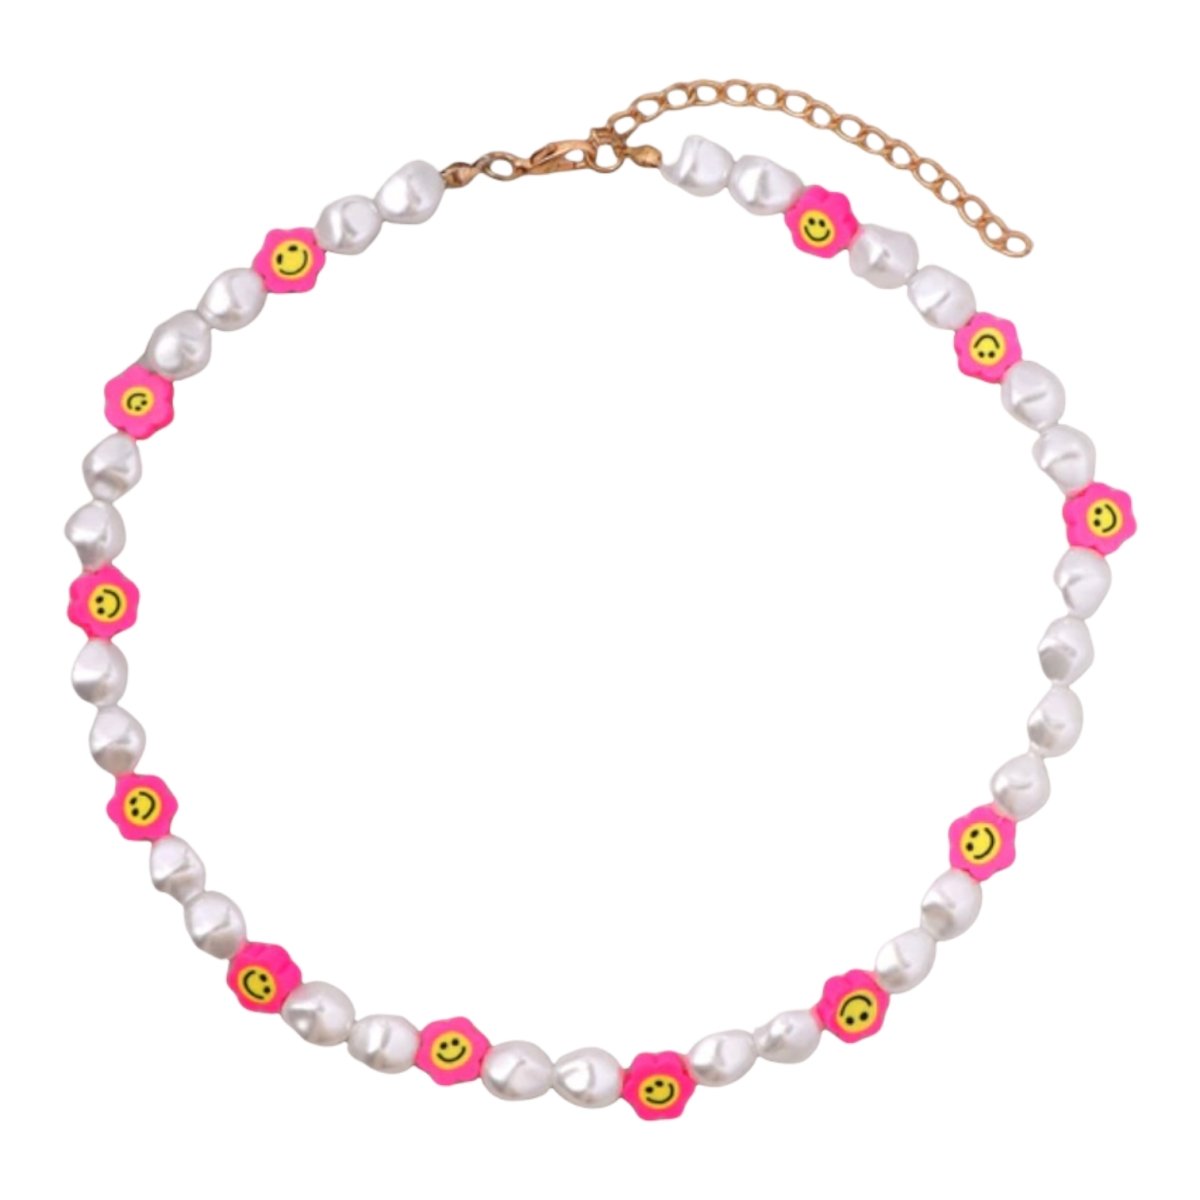 NEON DAISY SMILEY FACE PEARL NECKLACE - NECKLACES